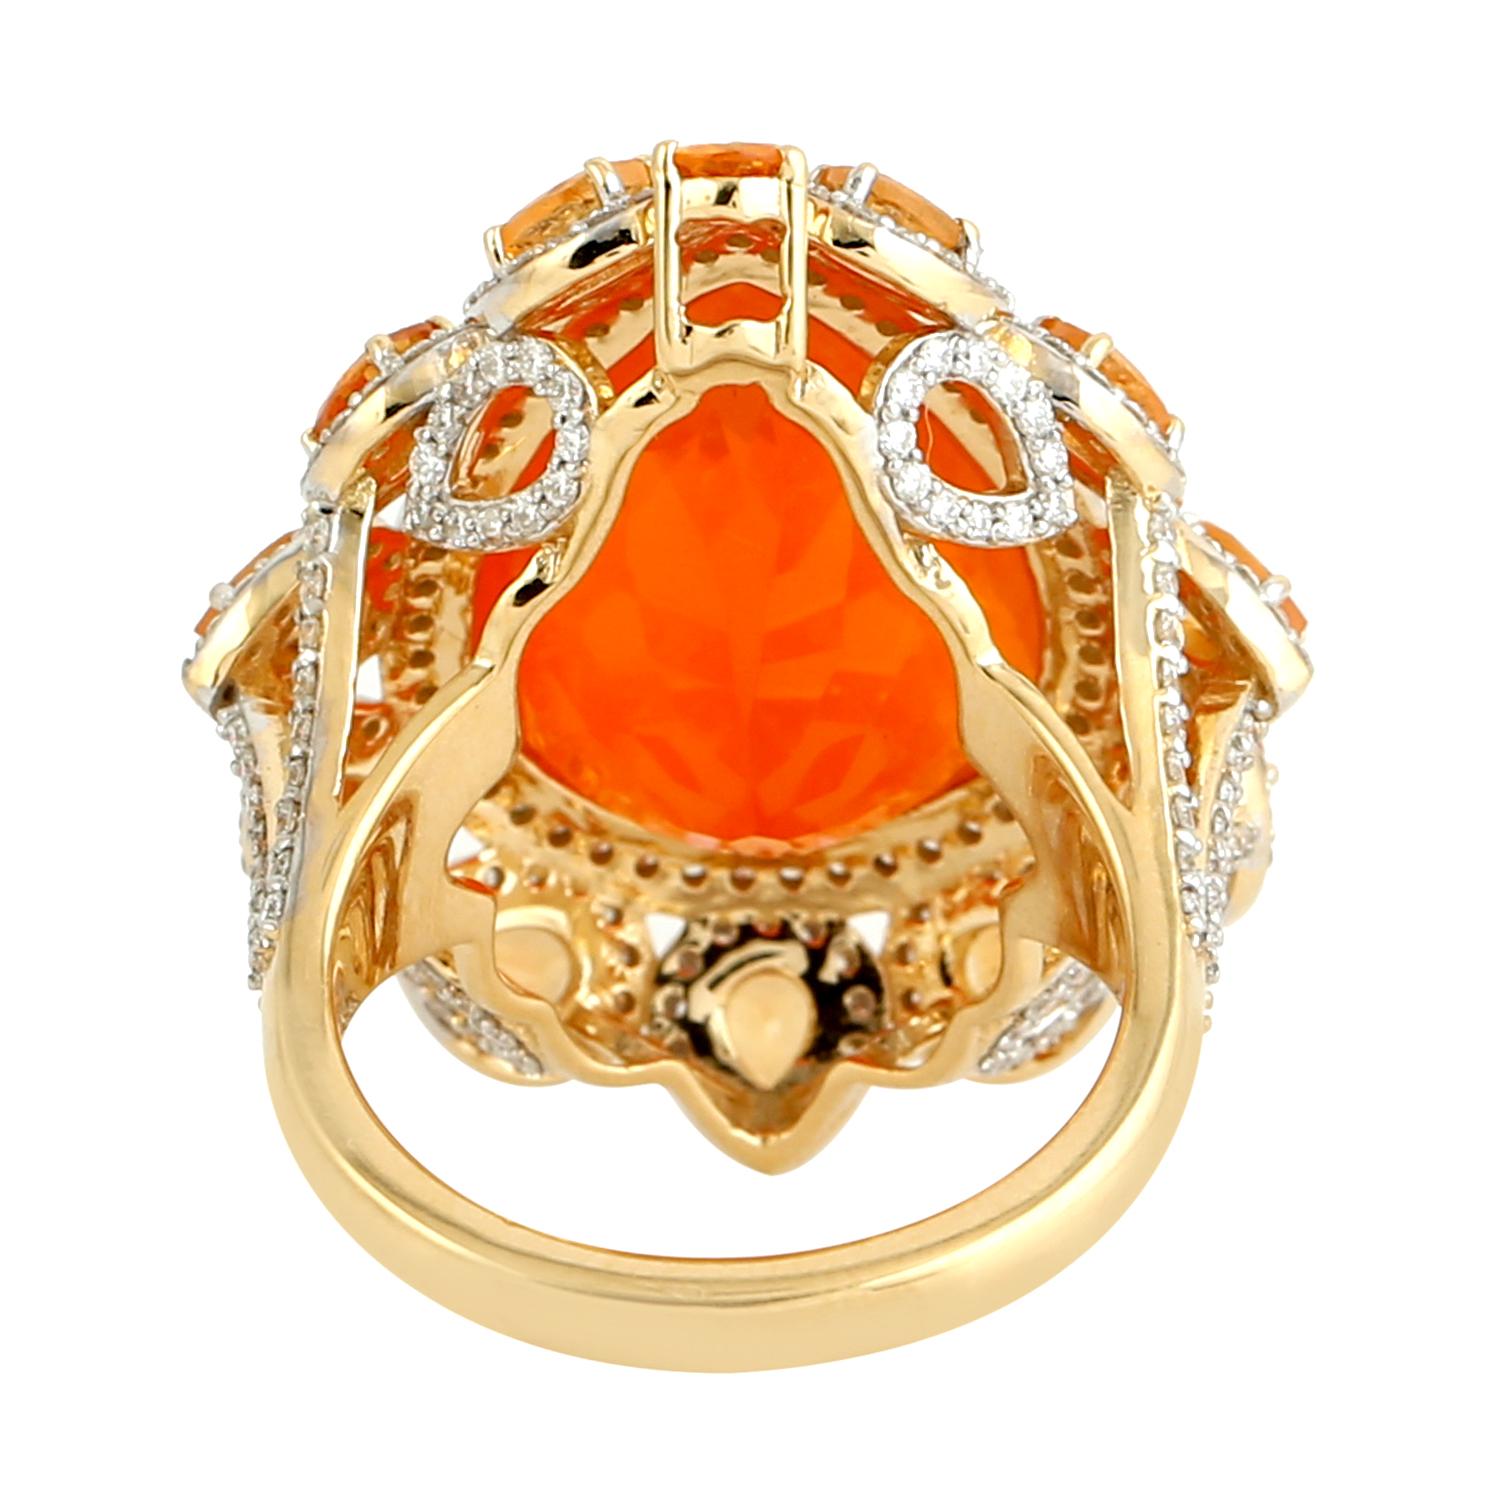 Artisan Pear Shaped Fire Opal Cocktail Ring With Garnet & Diamonds In 18k Yellow Gold For Sale